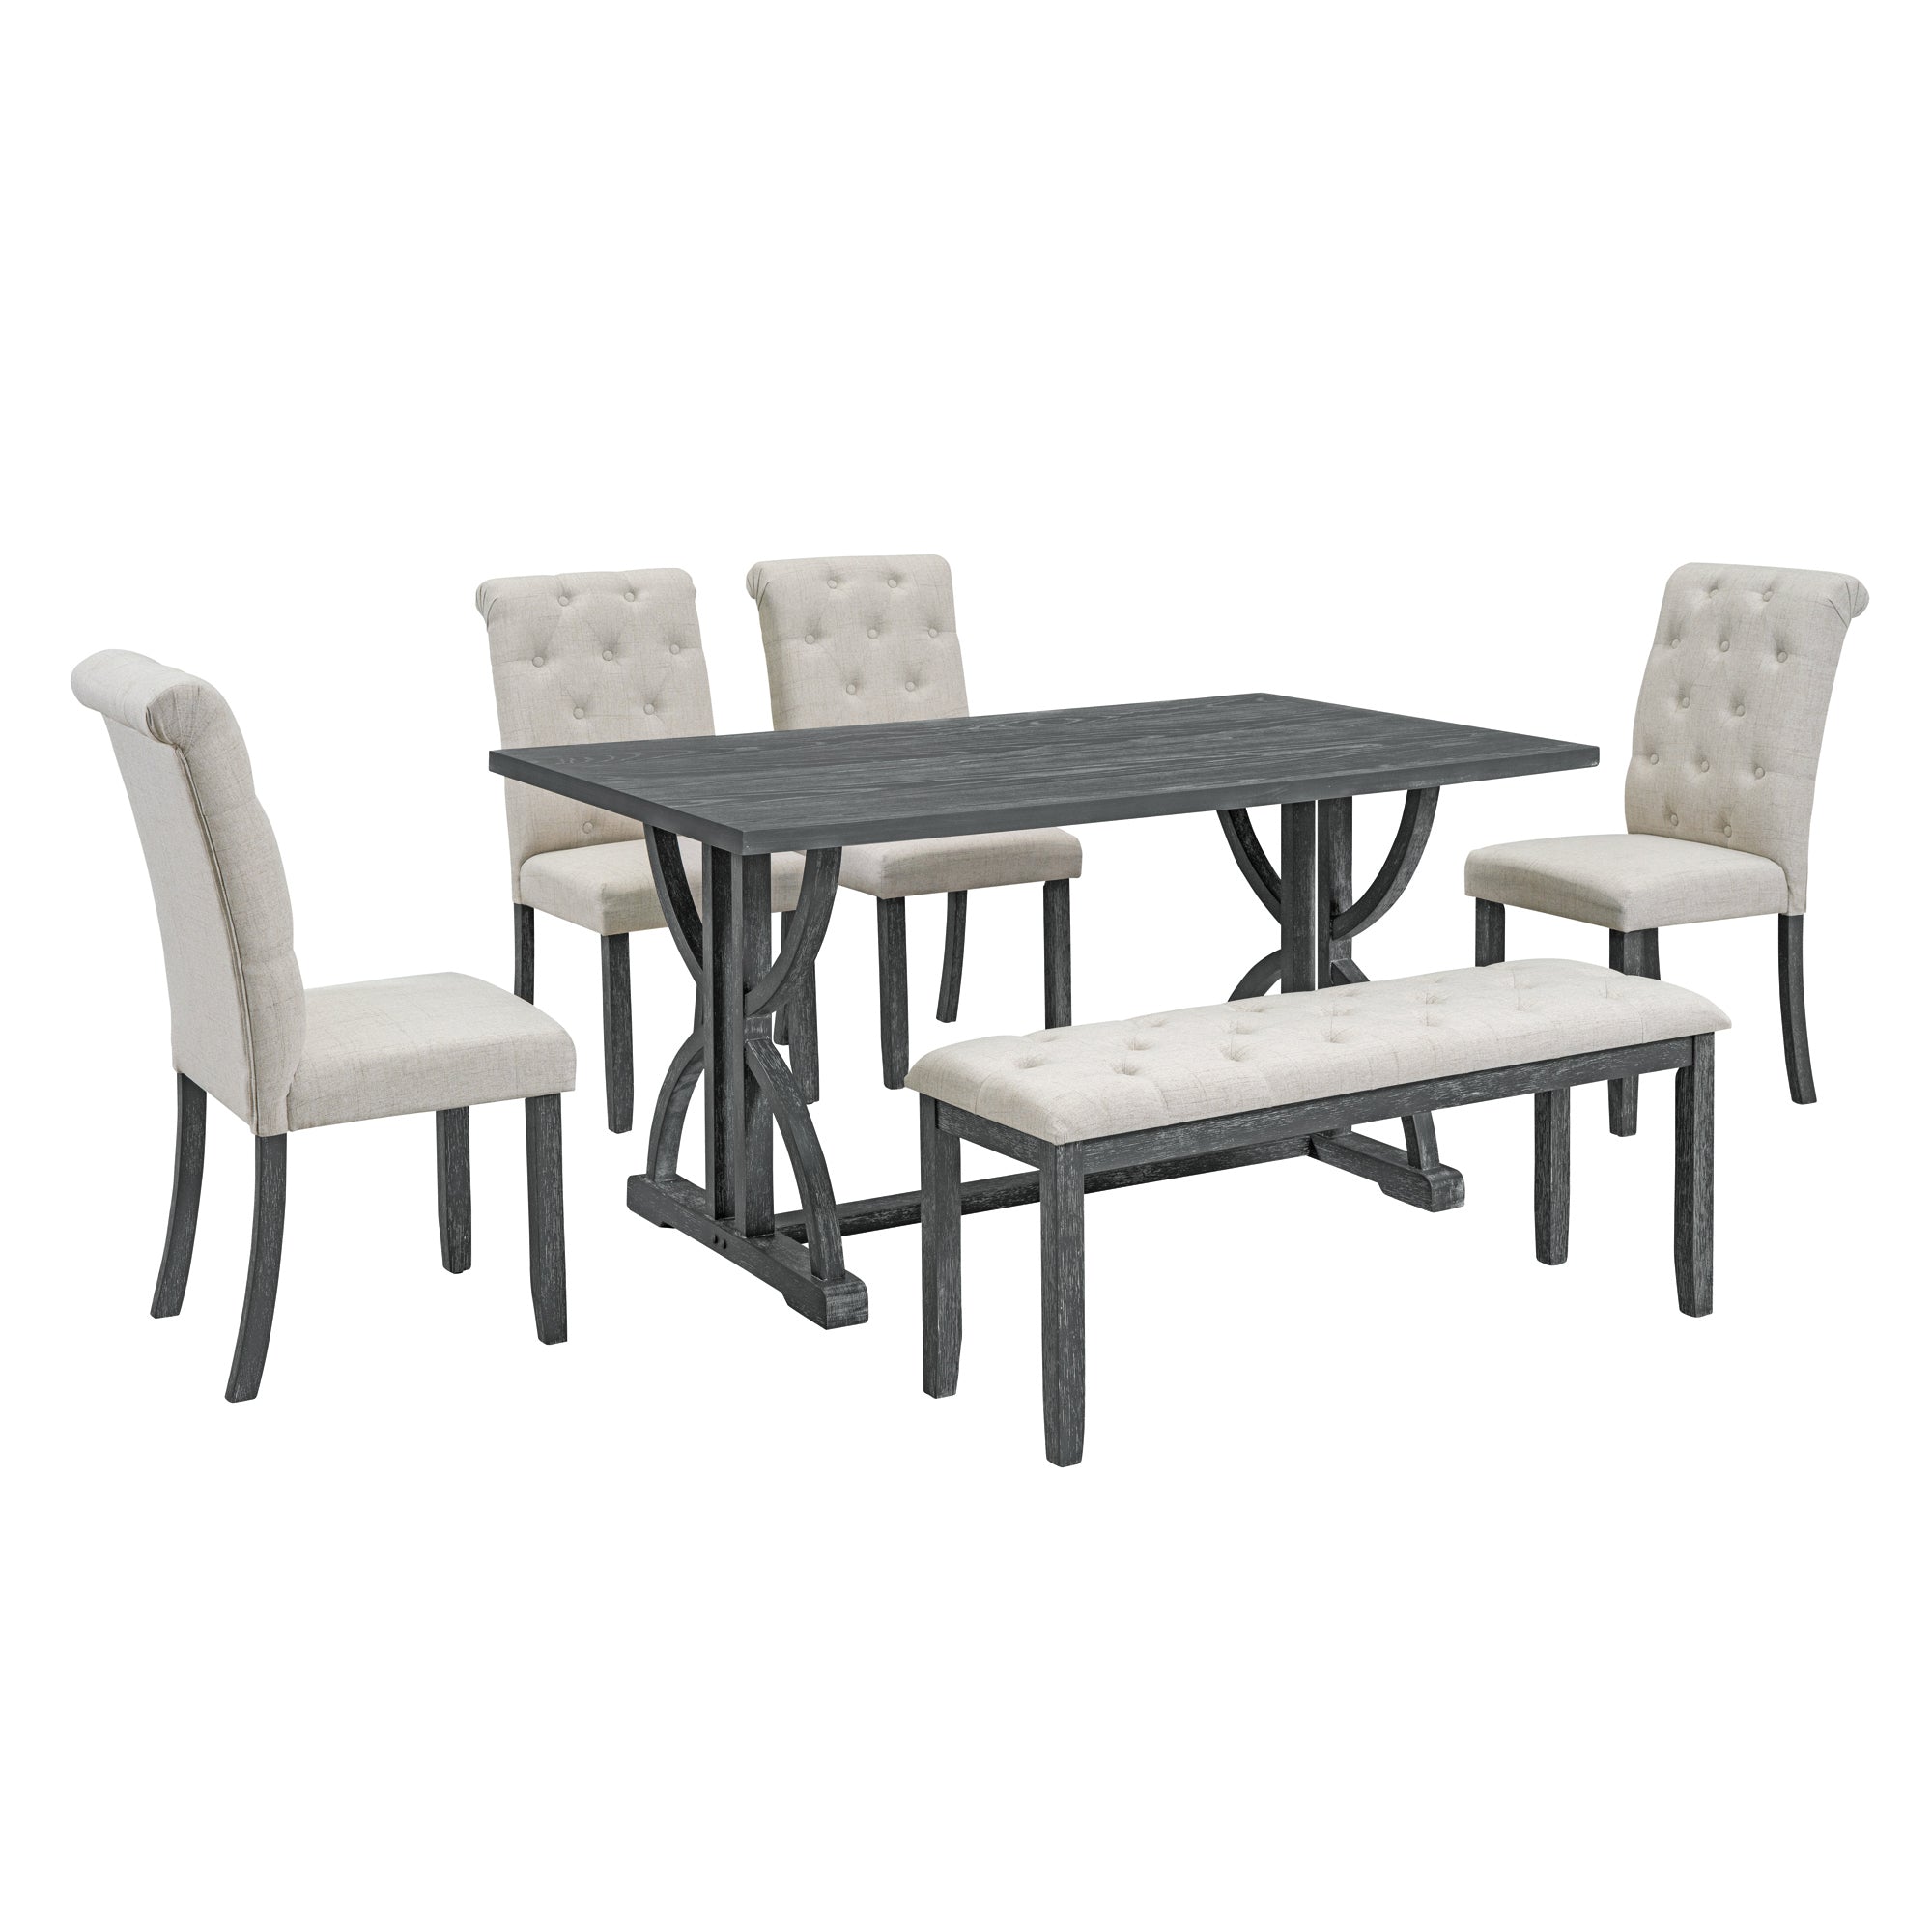 6-Piece Retro Rectangular Dining Table Set, Table with Unique Legs and 4 Upholstered Chairs & 1 Bench - Grey Wash